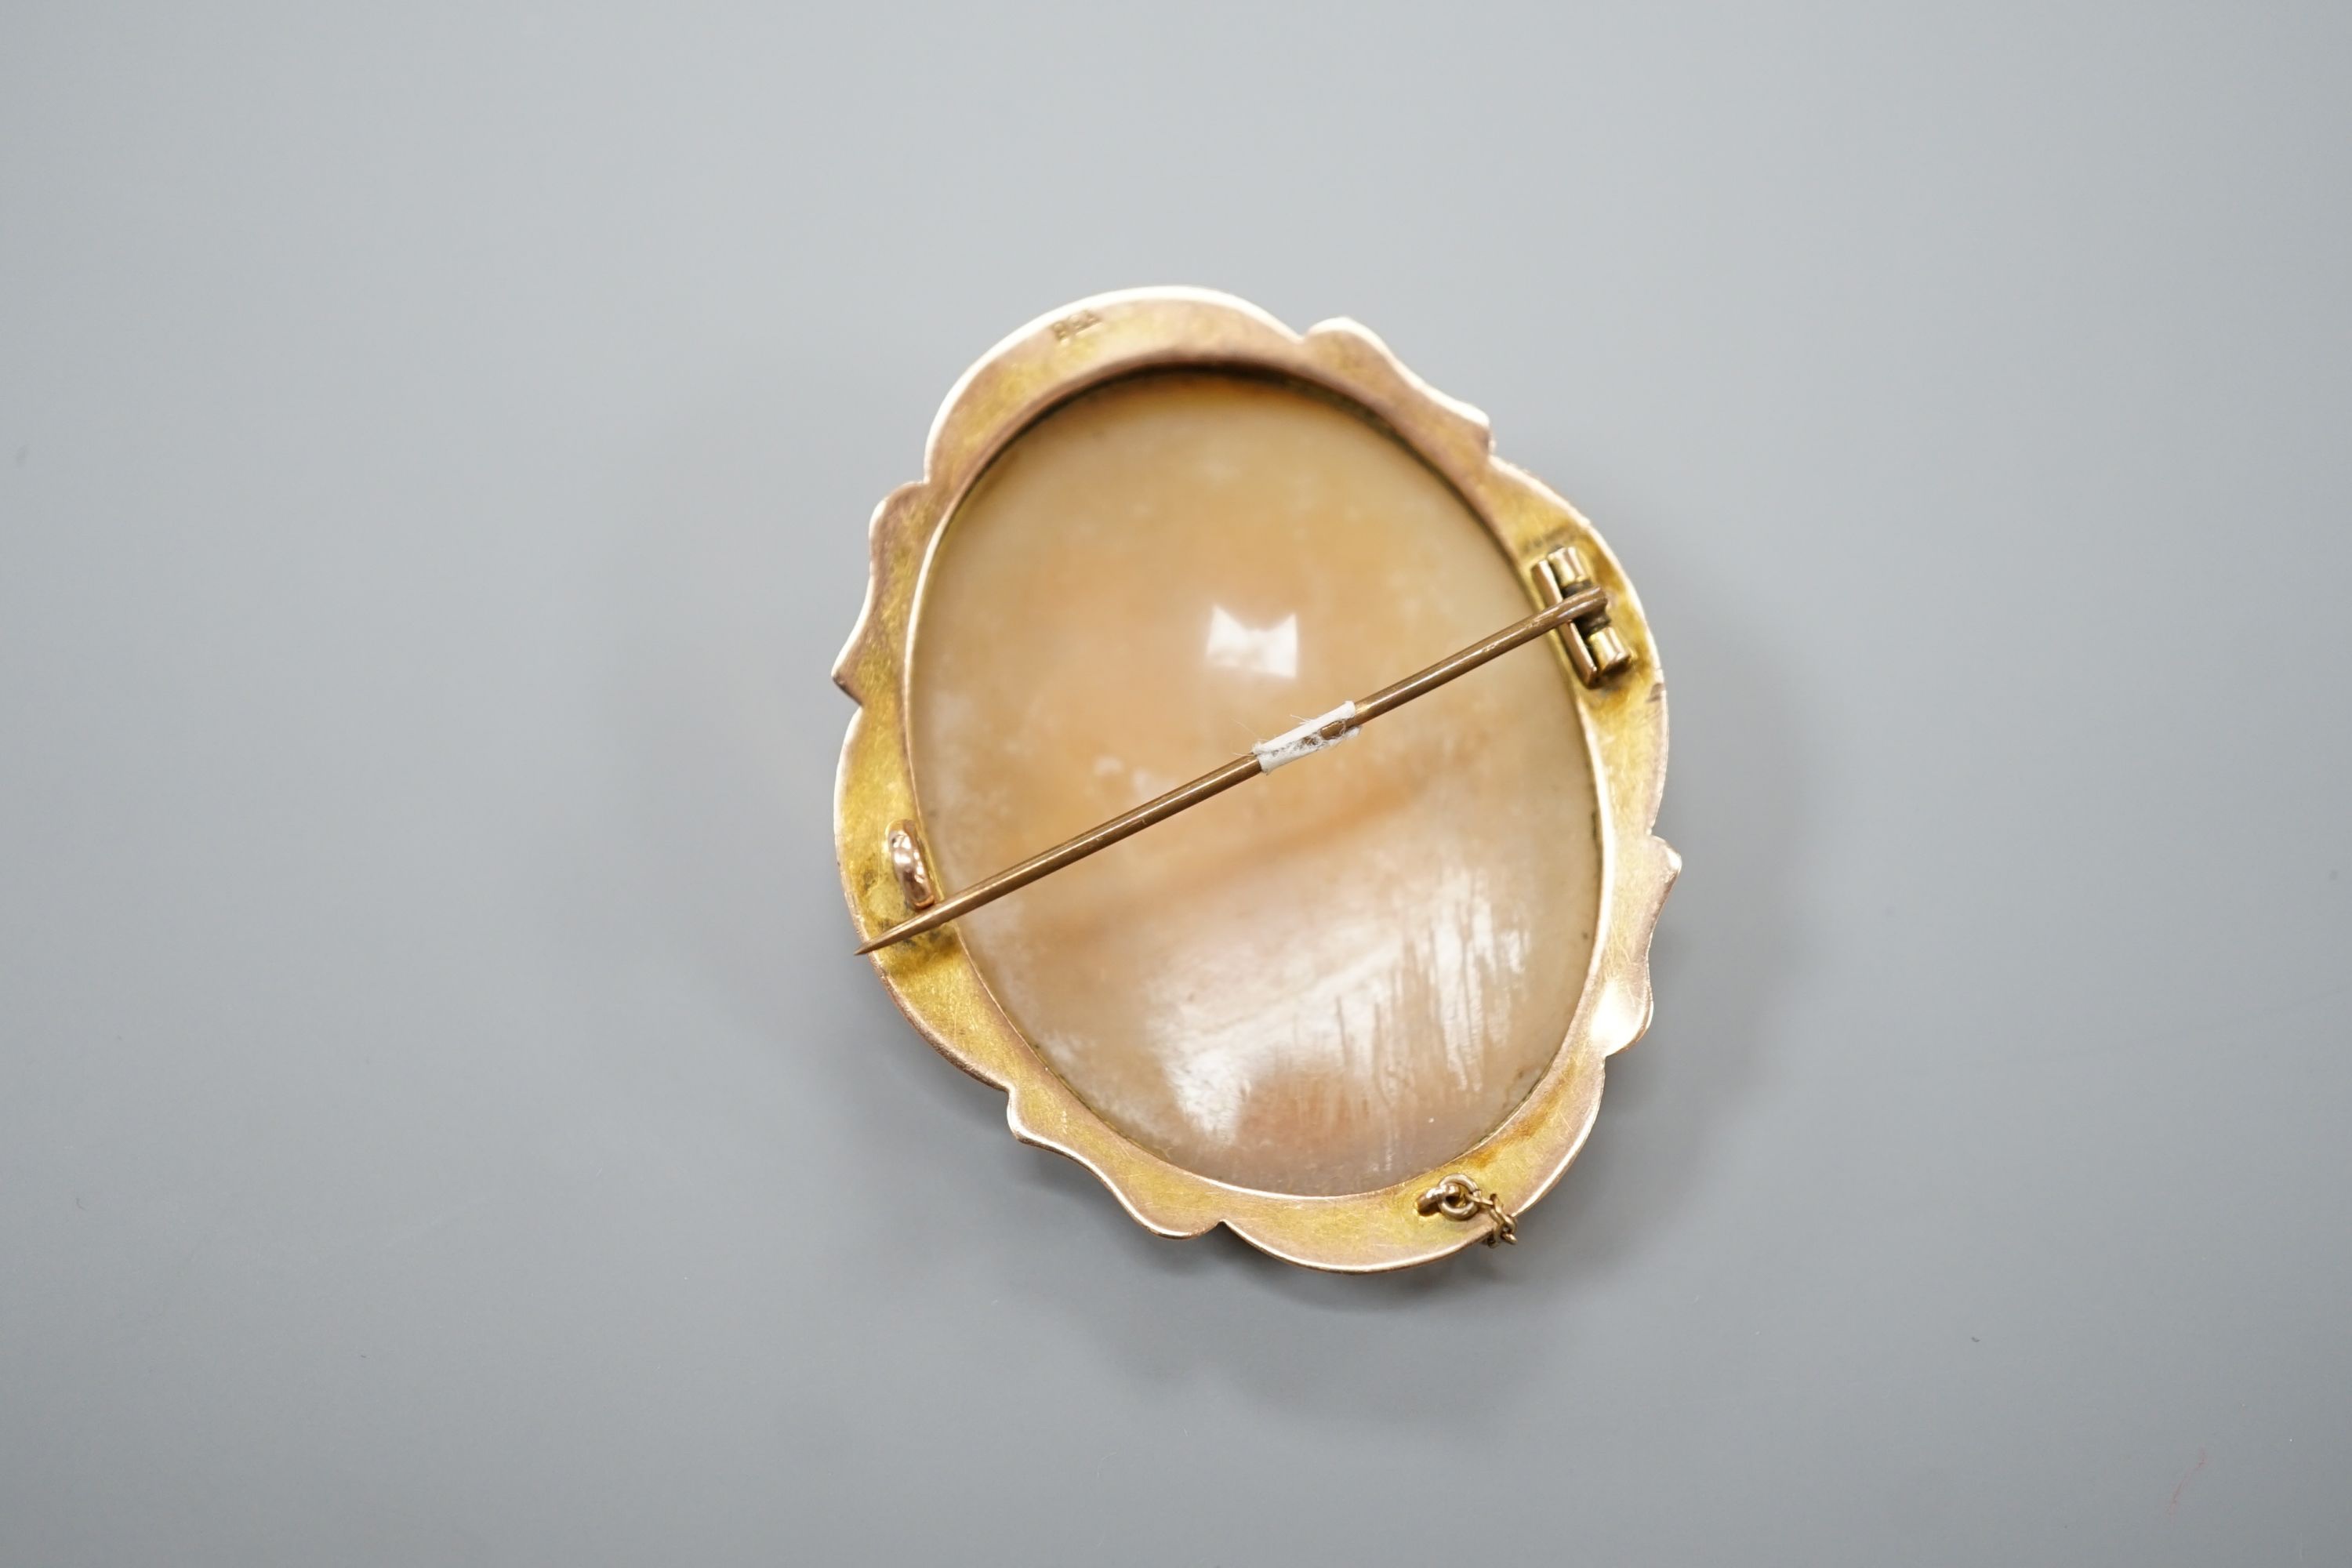 A 9ct mounted oval cameo shell brooch, decorated with two maidens, 46mm, gross 8.9 grams.